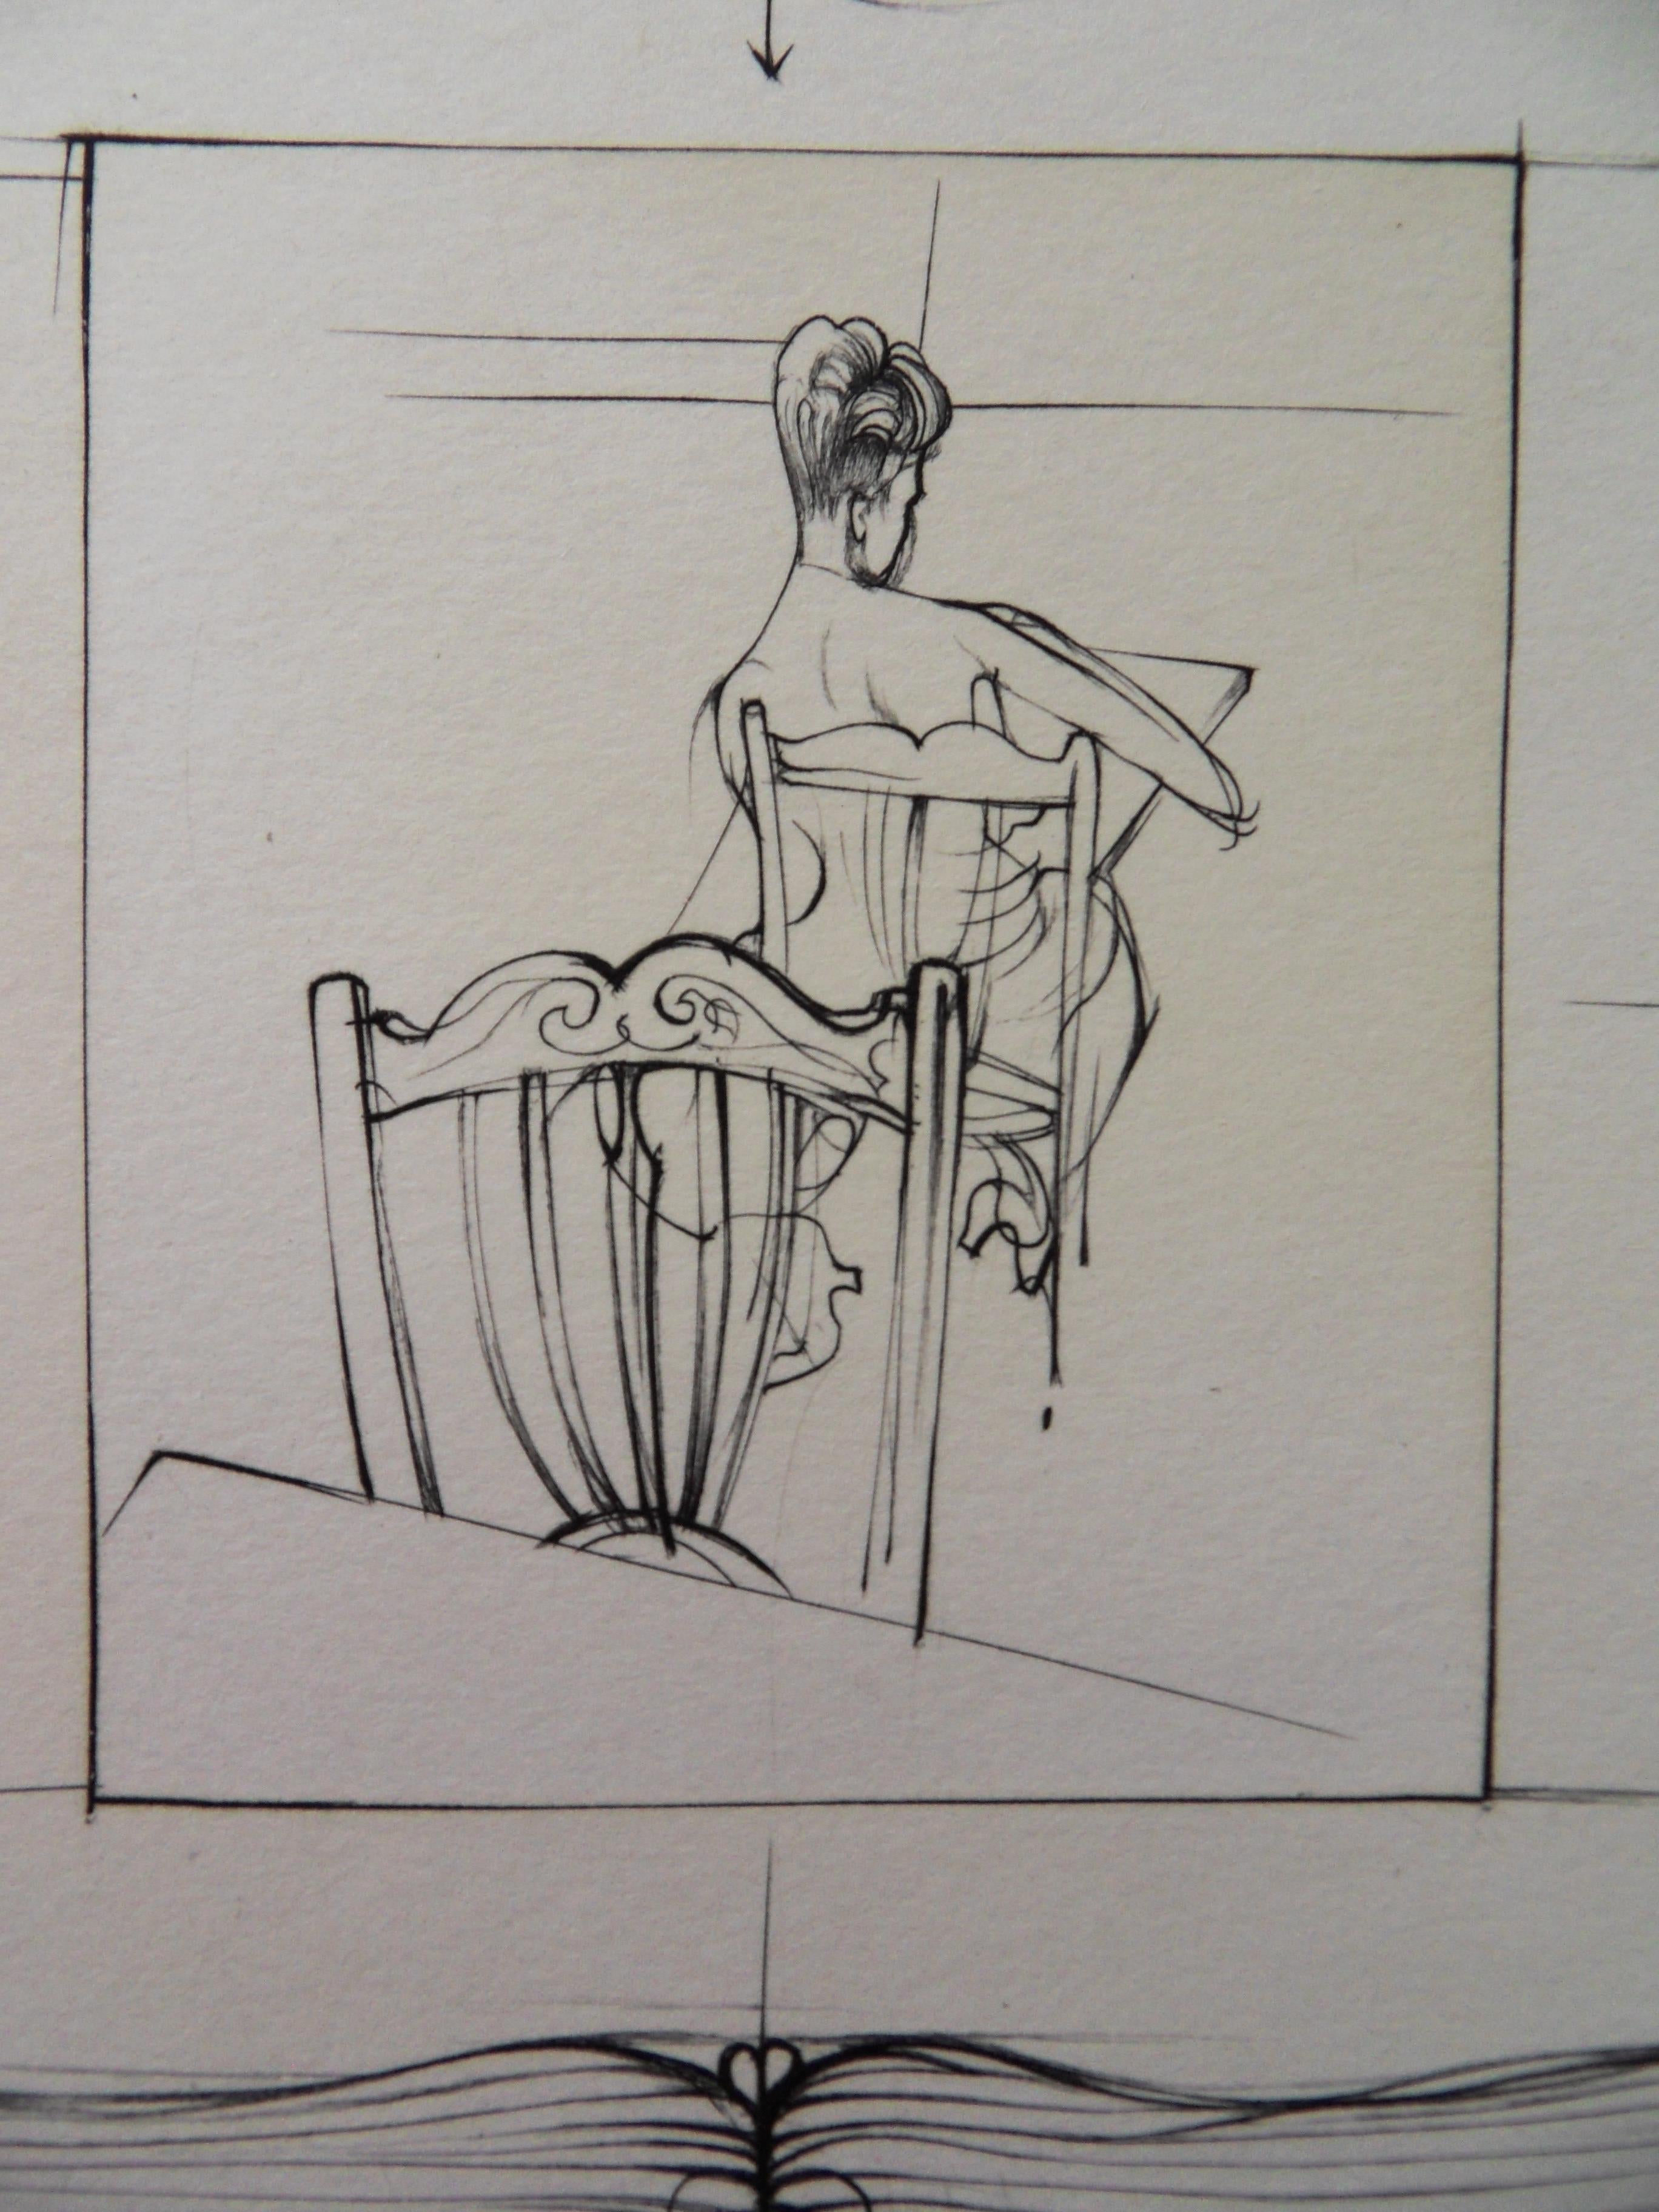 Framed Woman - Original Etching Handsigned, Numbered - Gray Figurative Print by Hans Bellmer